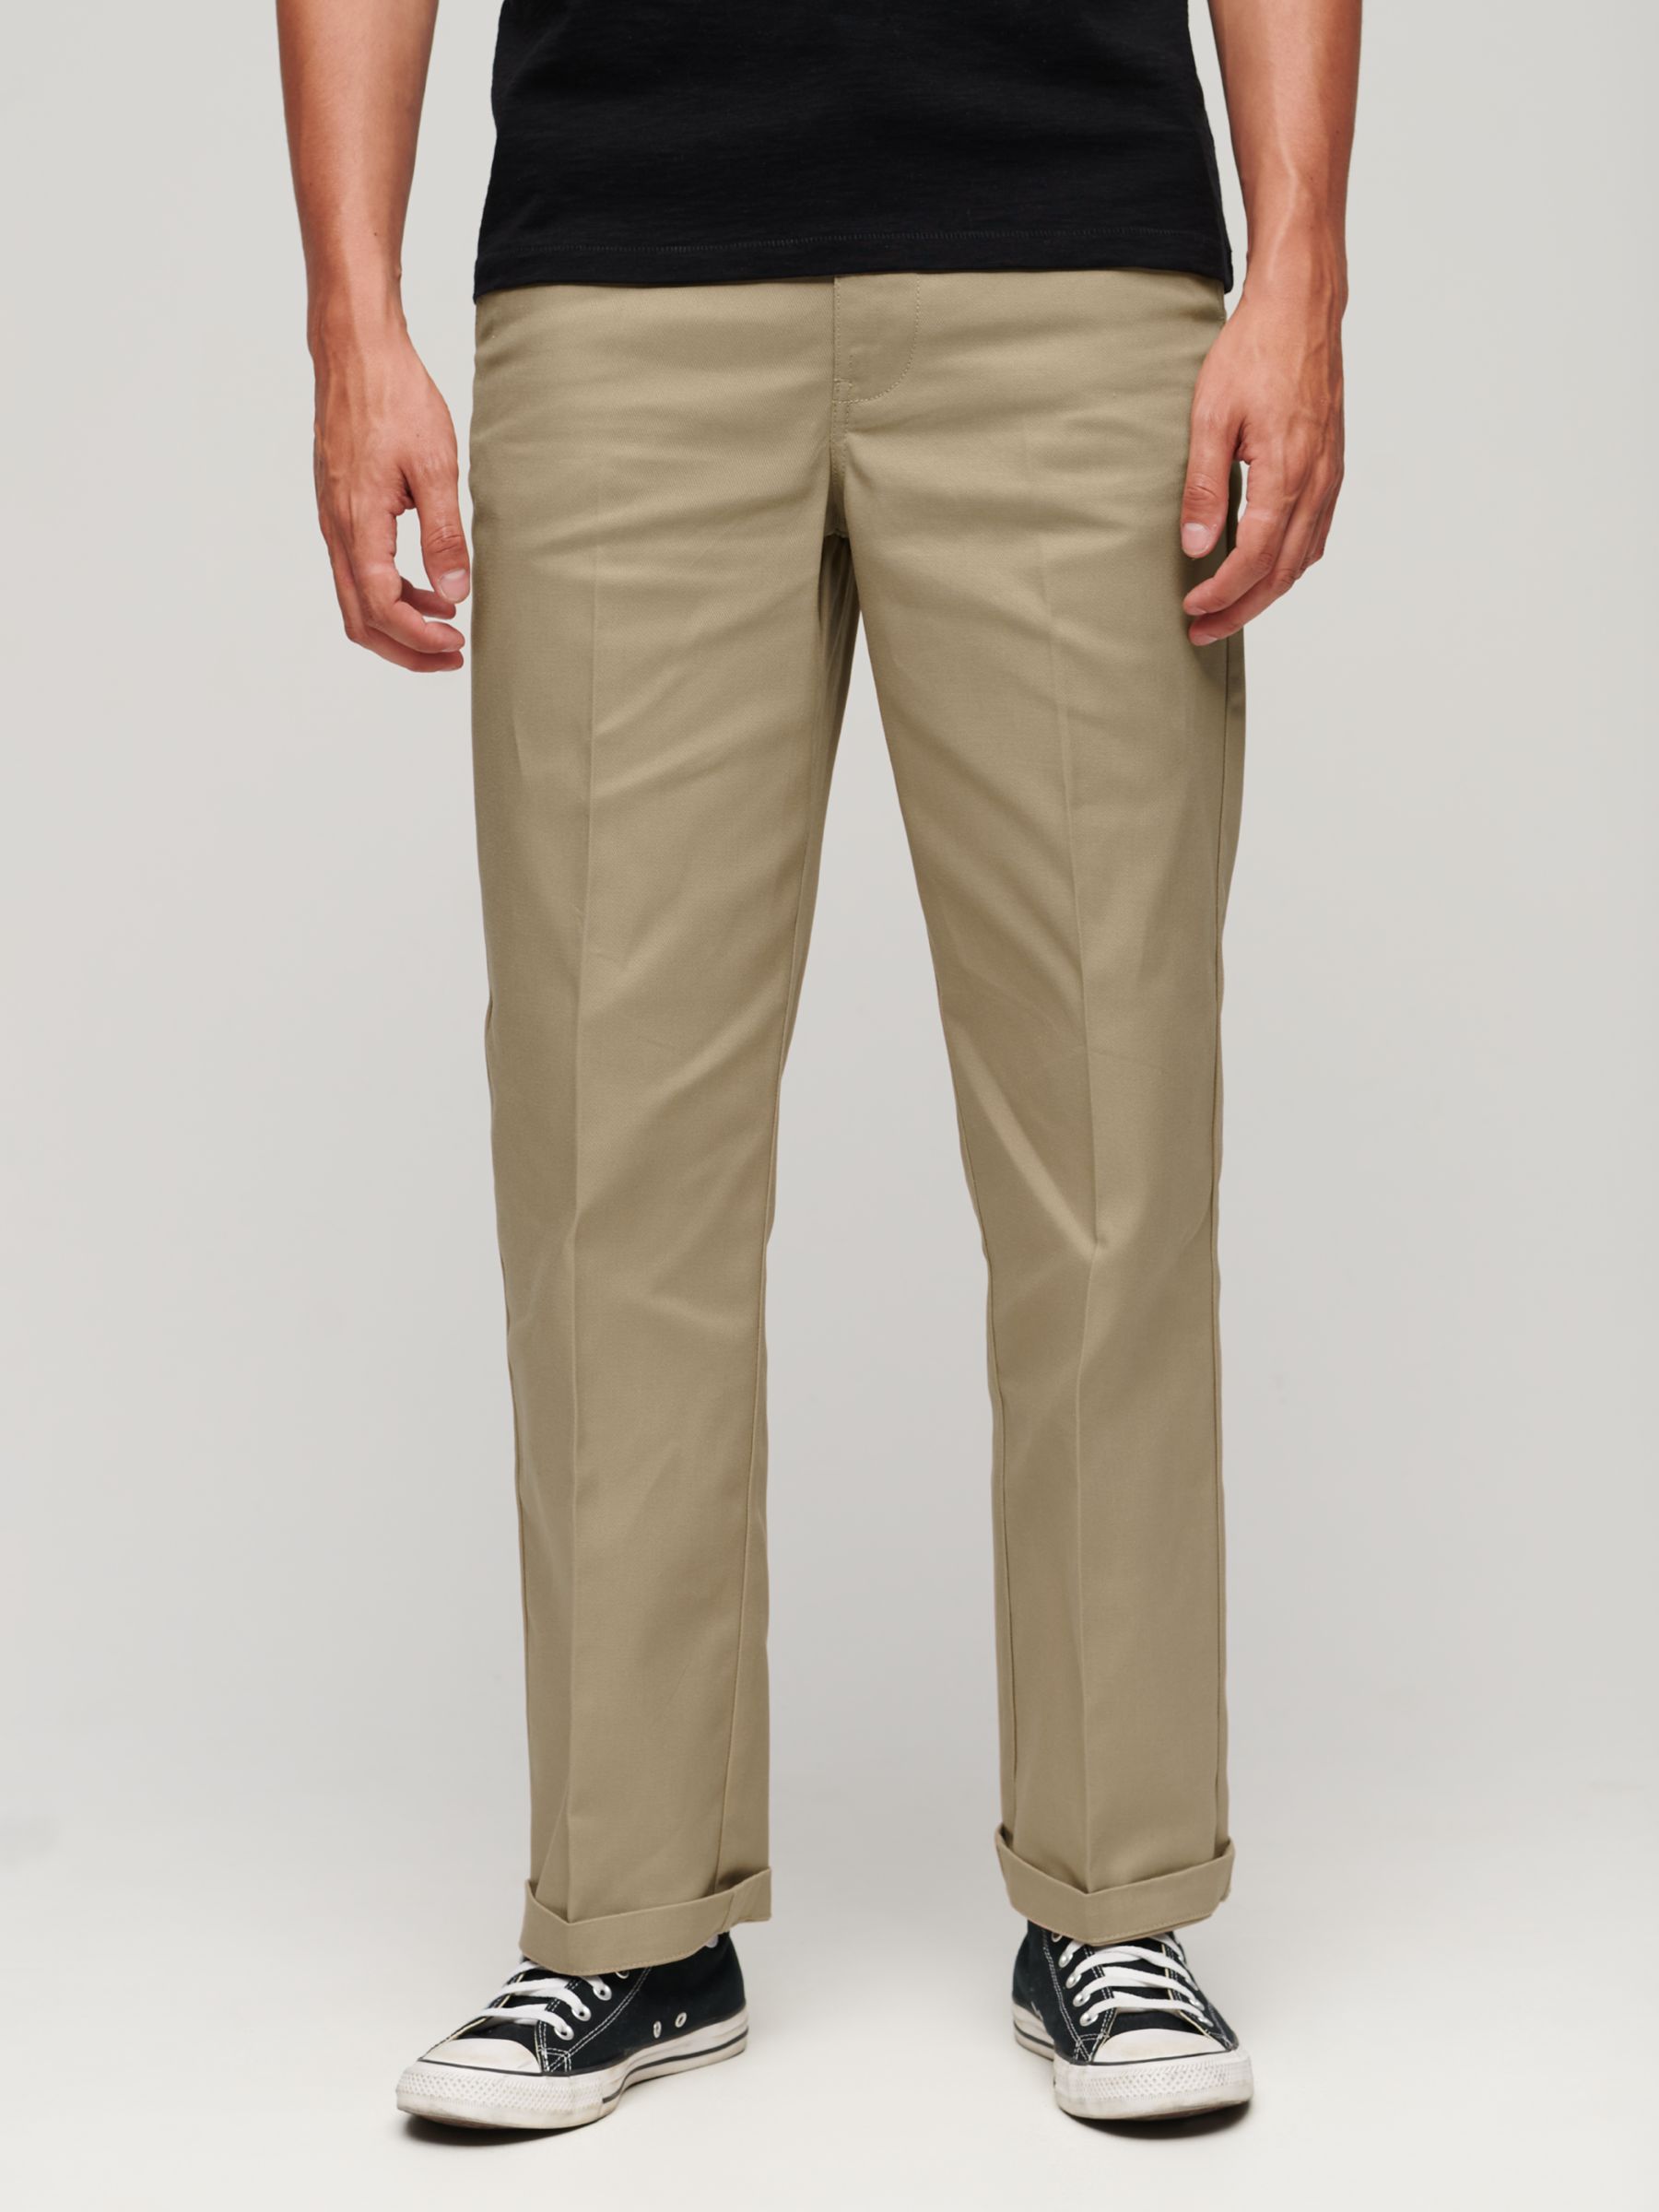 Buy Superdry Straight Chinos Online at johnlewis.com